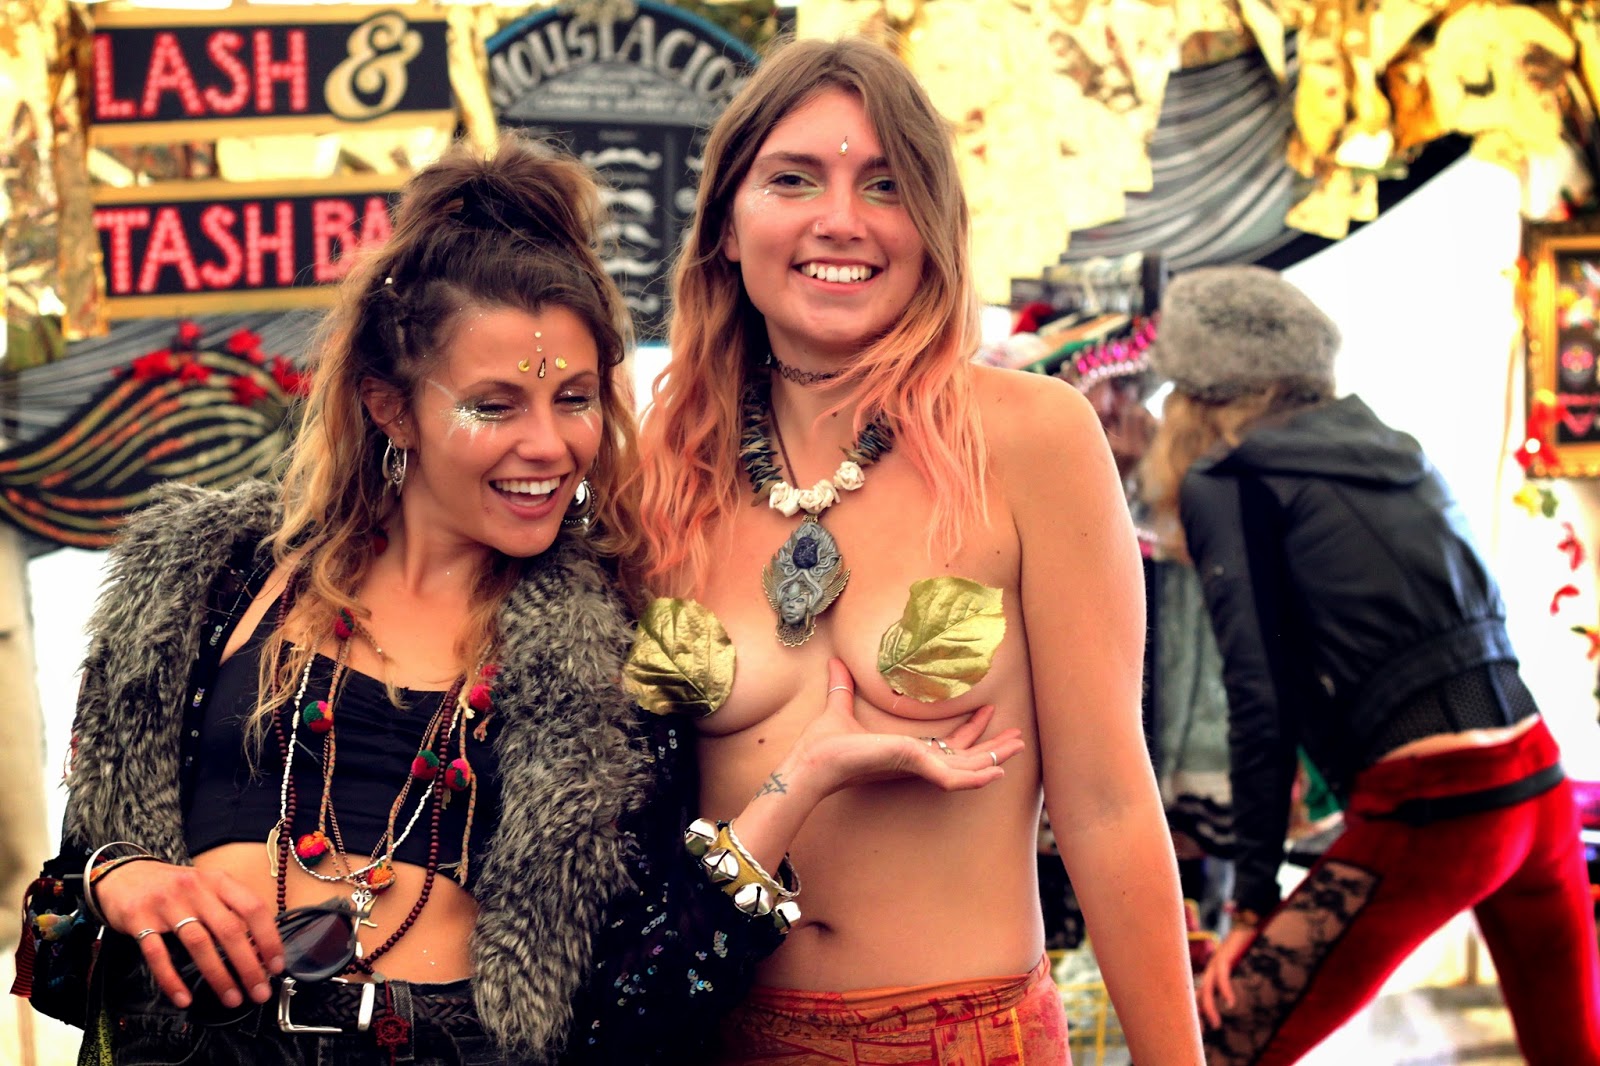 nipple pastie, The Fashpack, festival style